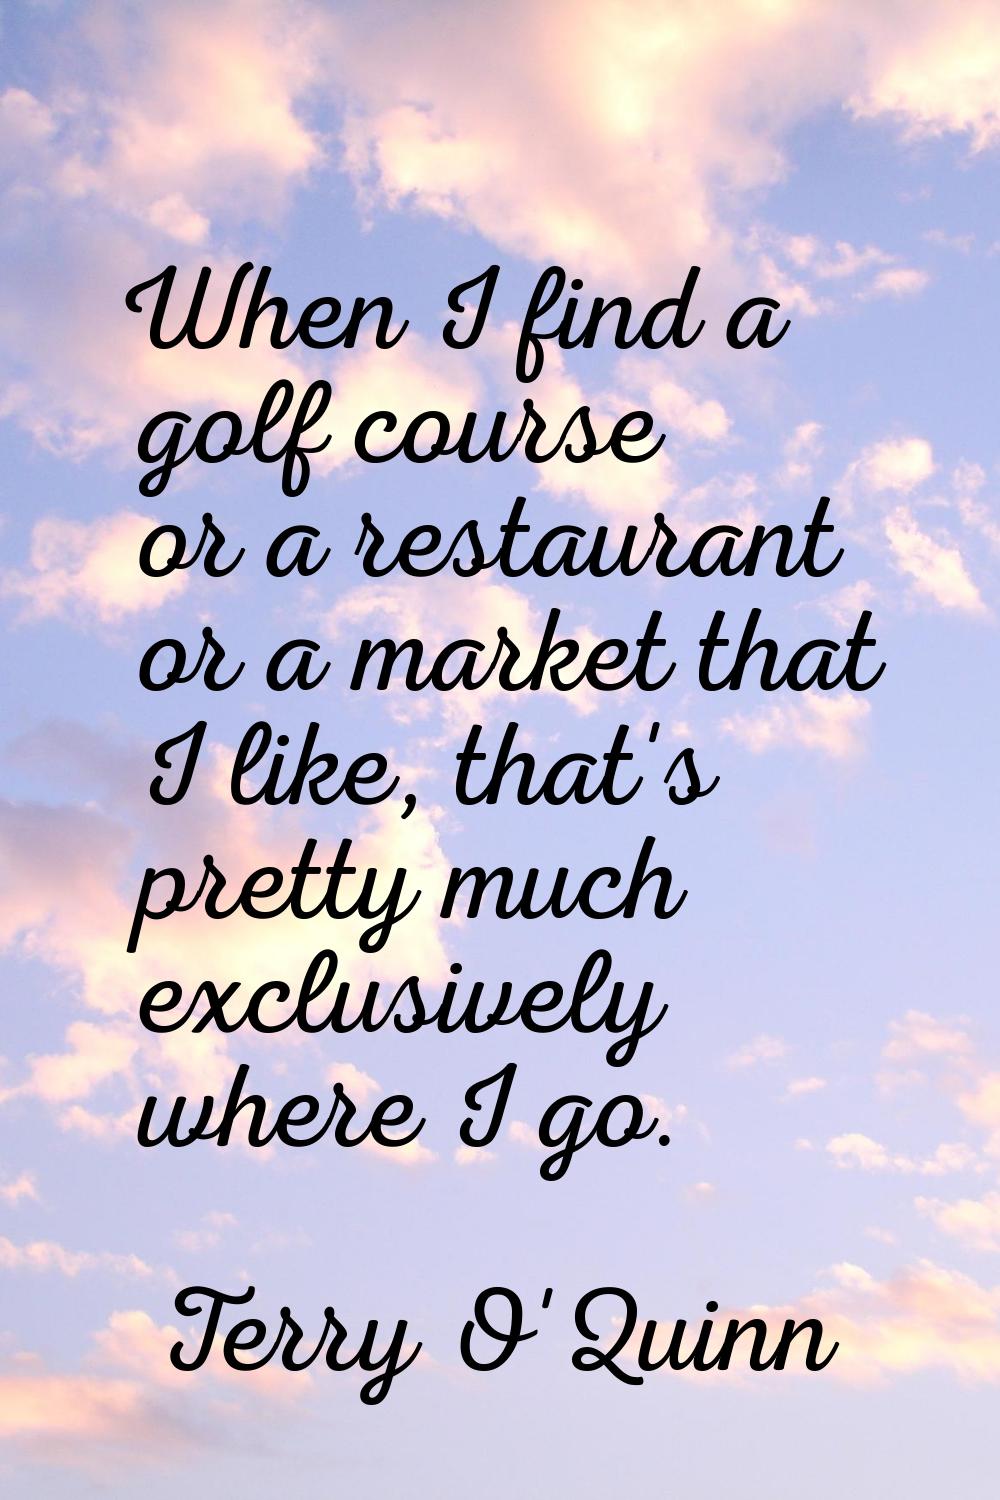 When I find a golf course or a restaurant or a market that I like, that's pretty much exclusively w